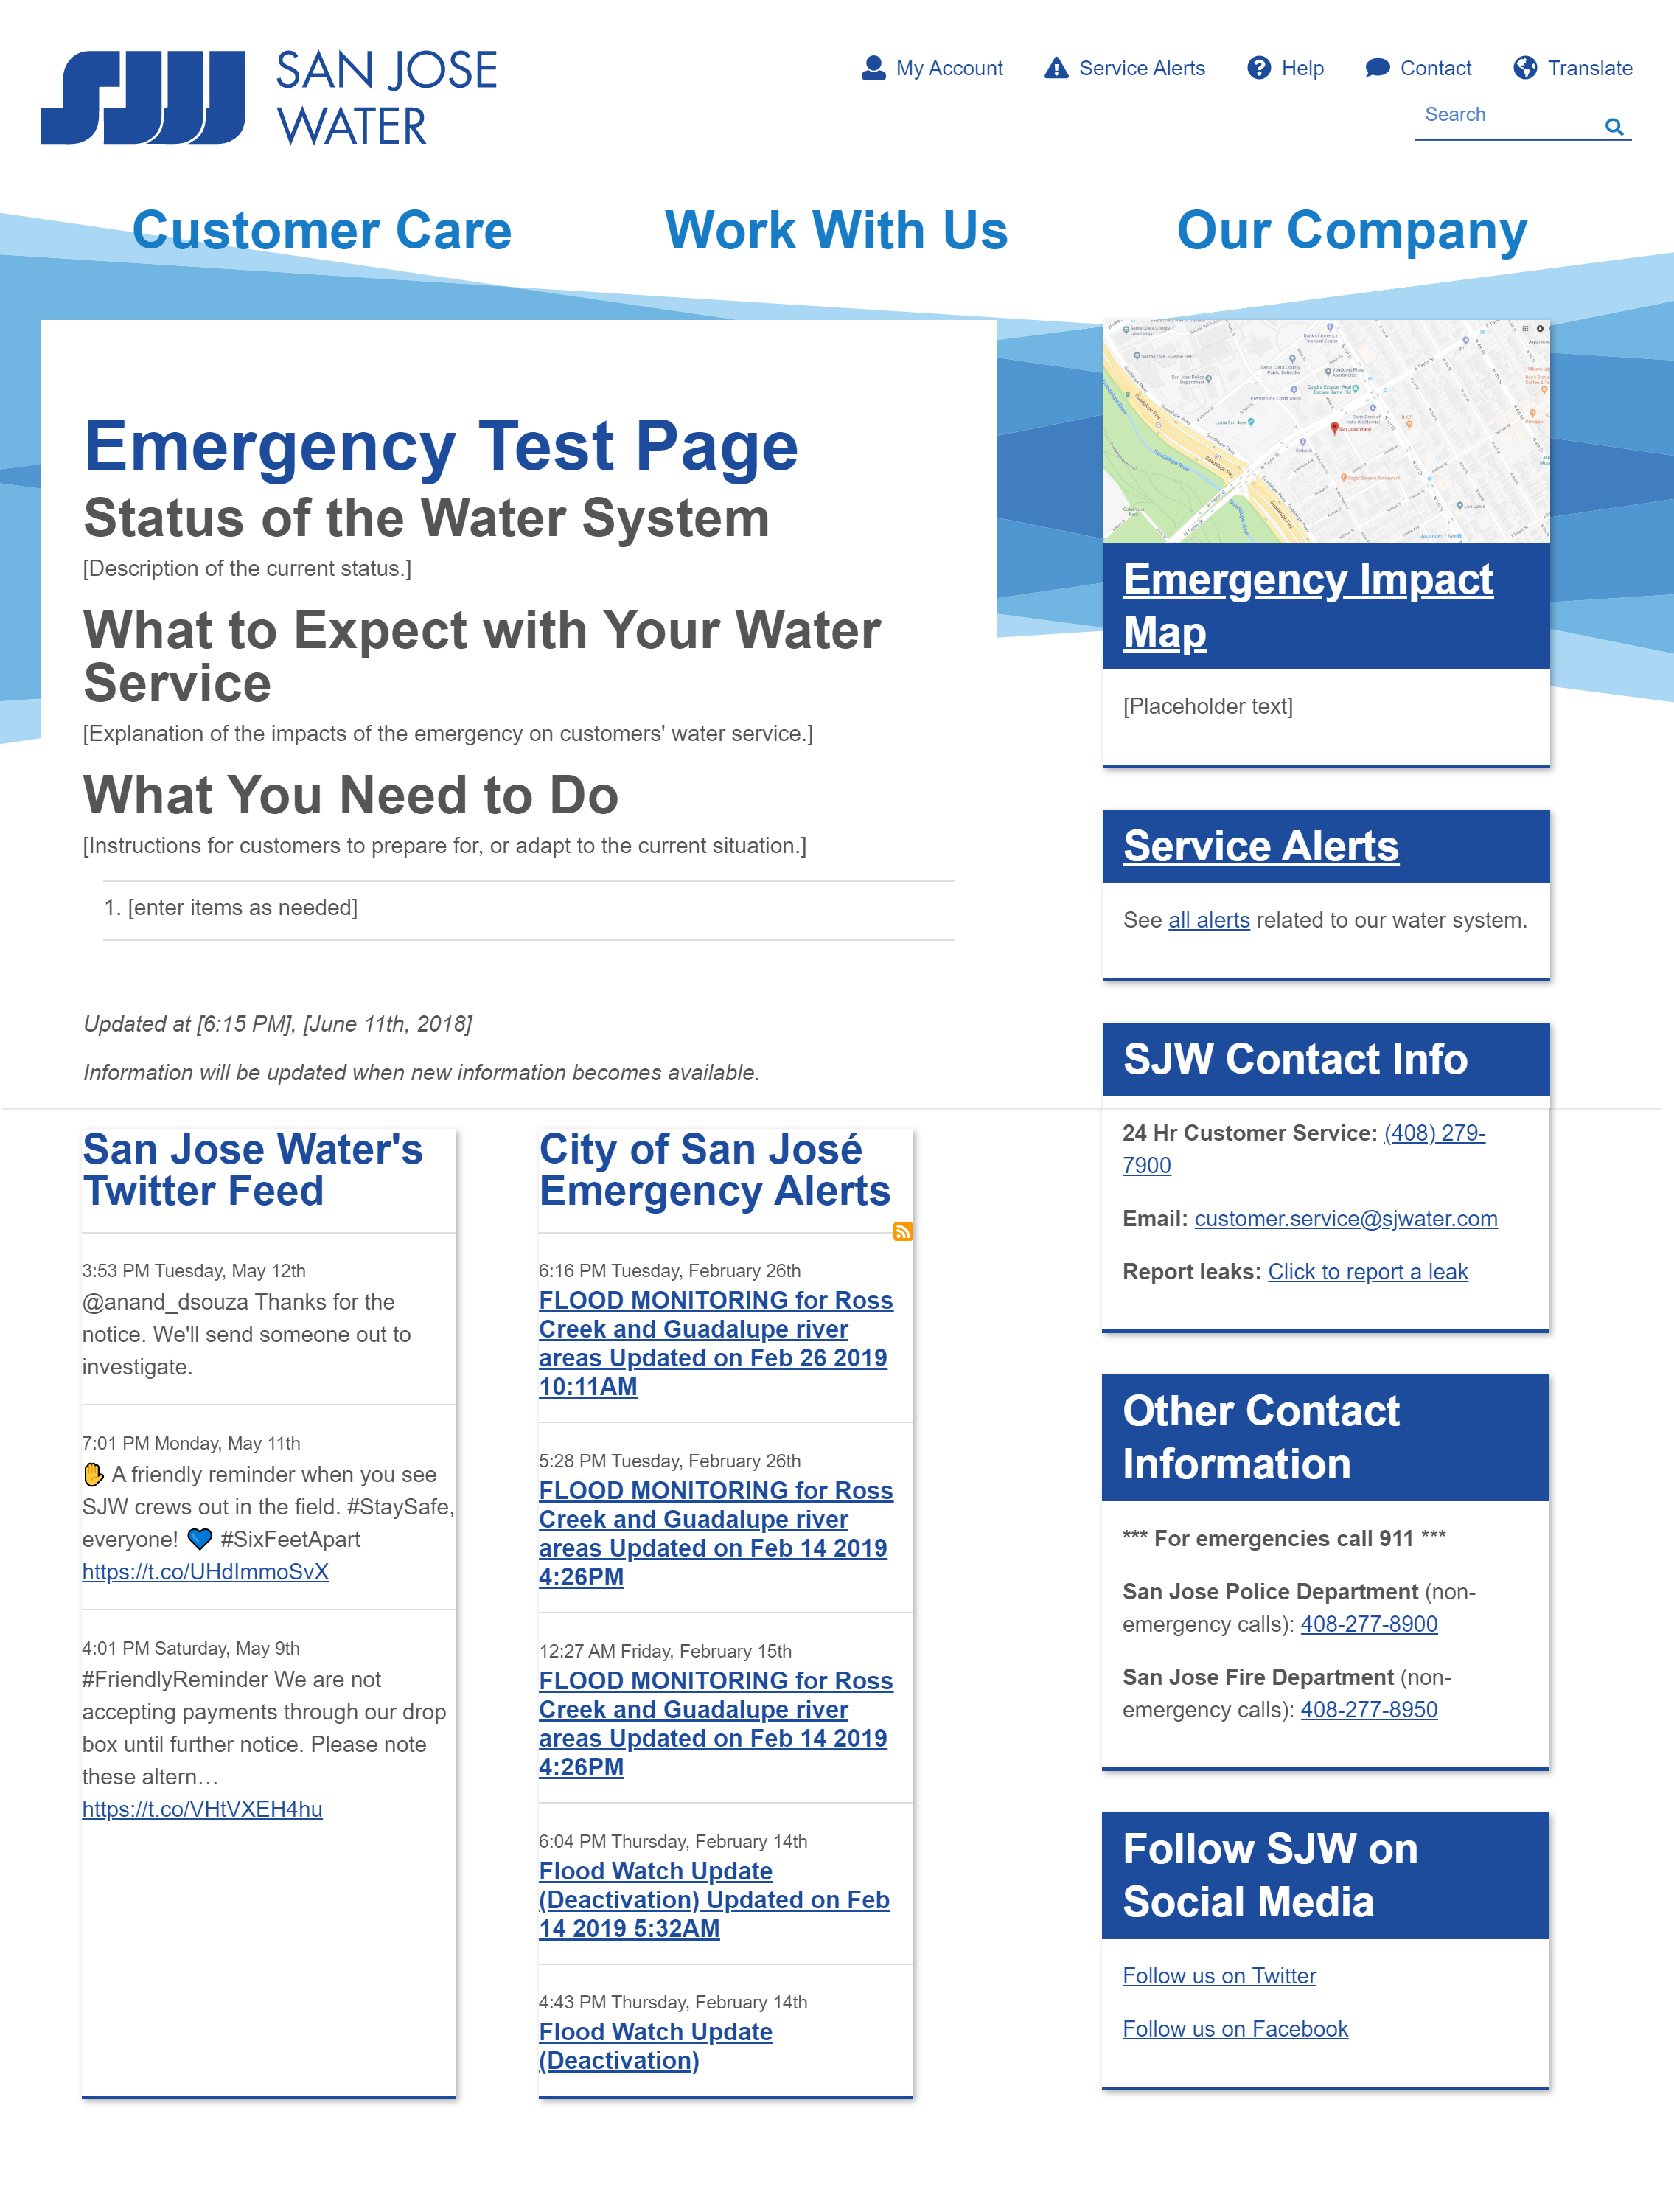 Kalamuna designed and implemented an emergency homepage takeover for San Jose Water, which includes a template that can be adapted when an emergency occurs.